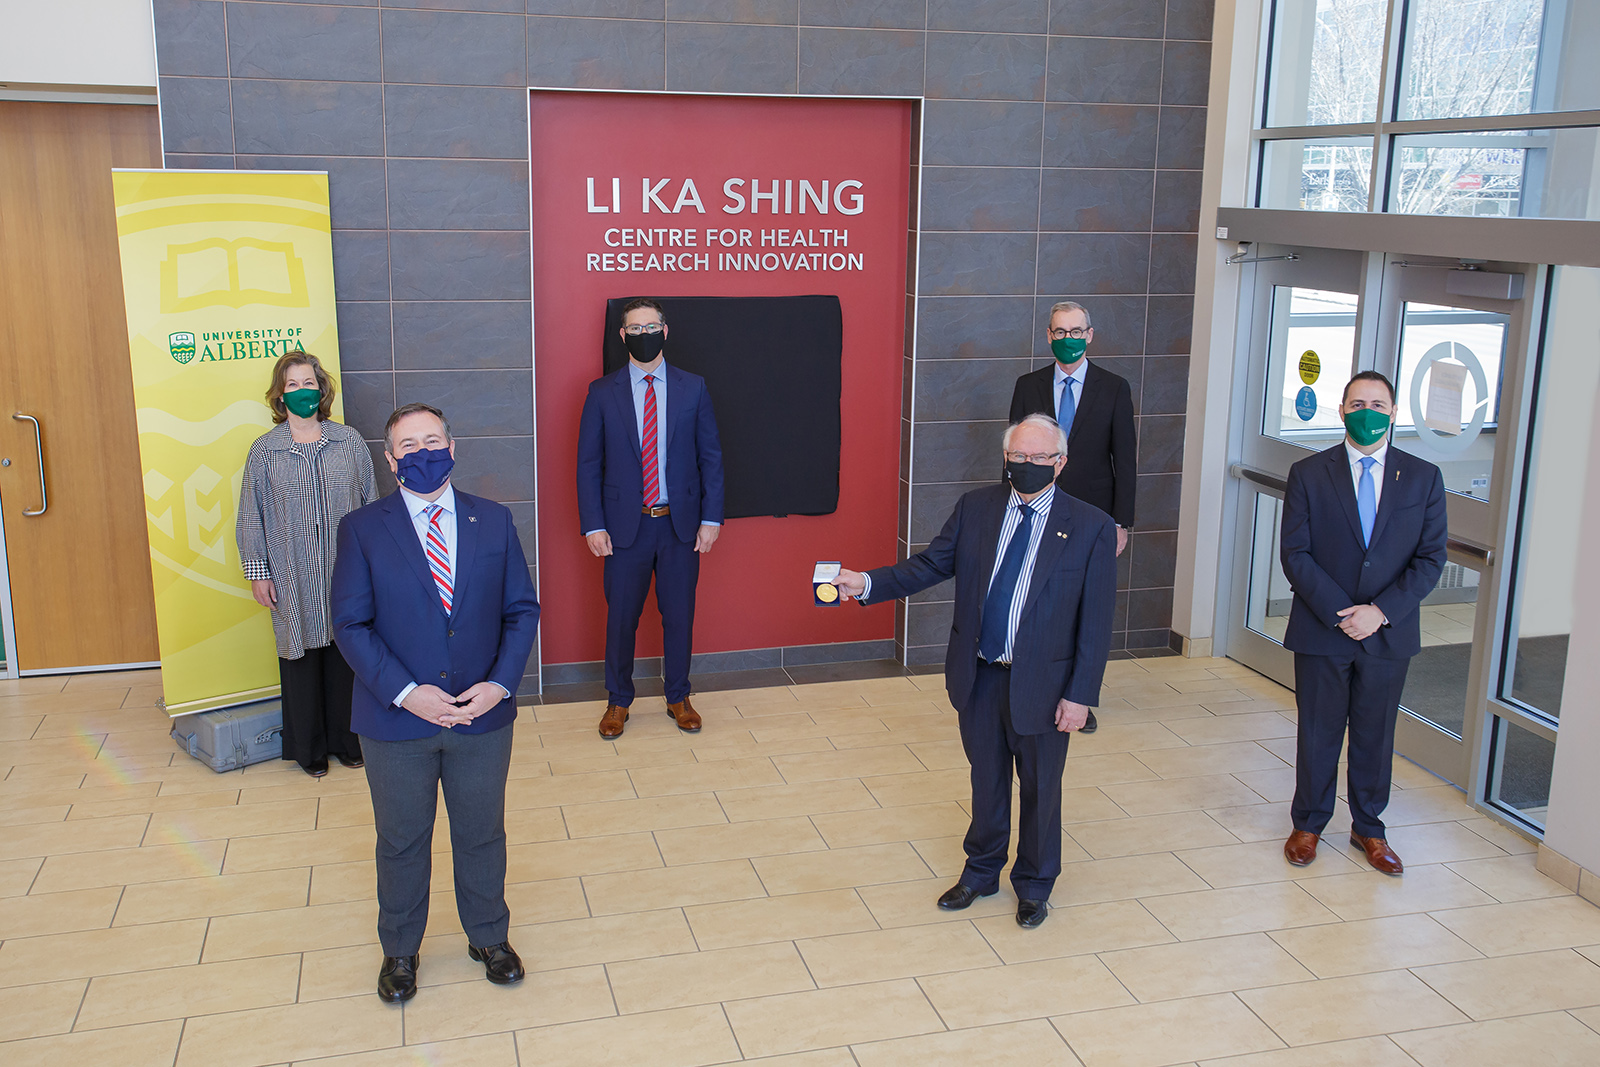 Li Ka Shing Applied Virology Institute received $20M from the Government of Alberta